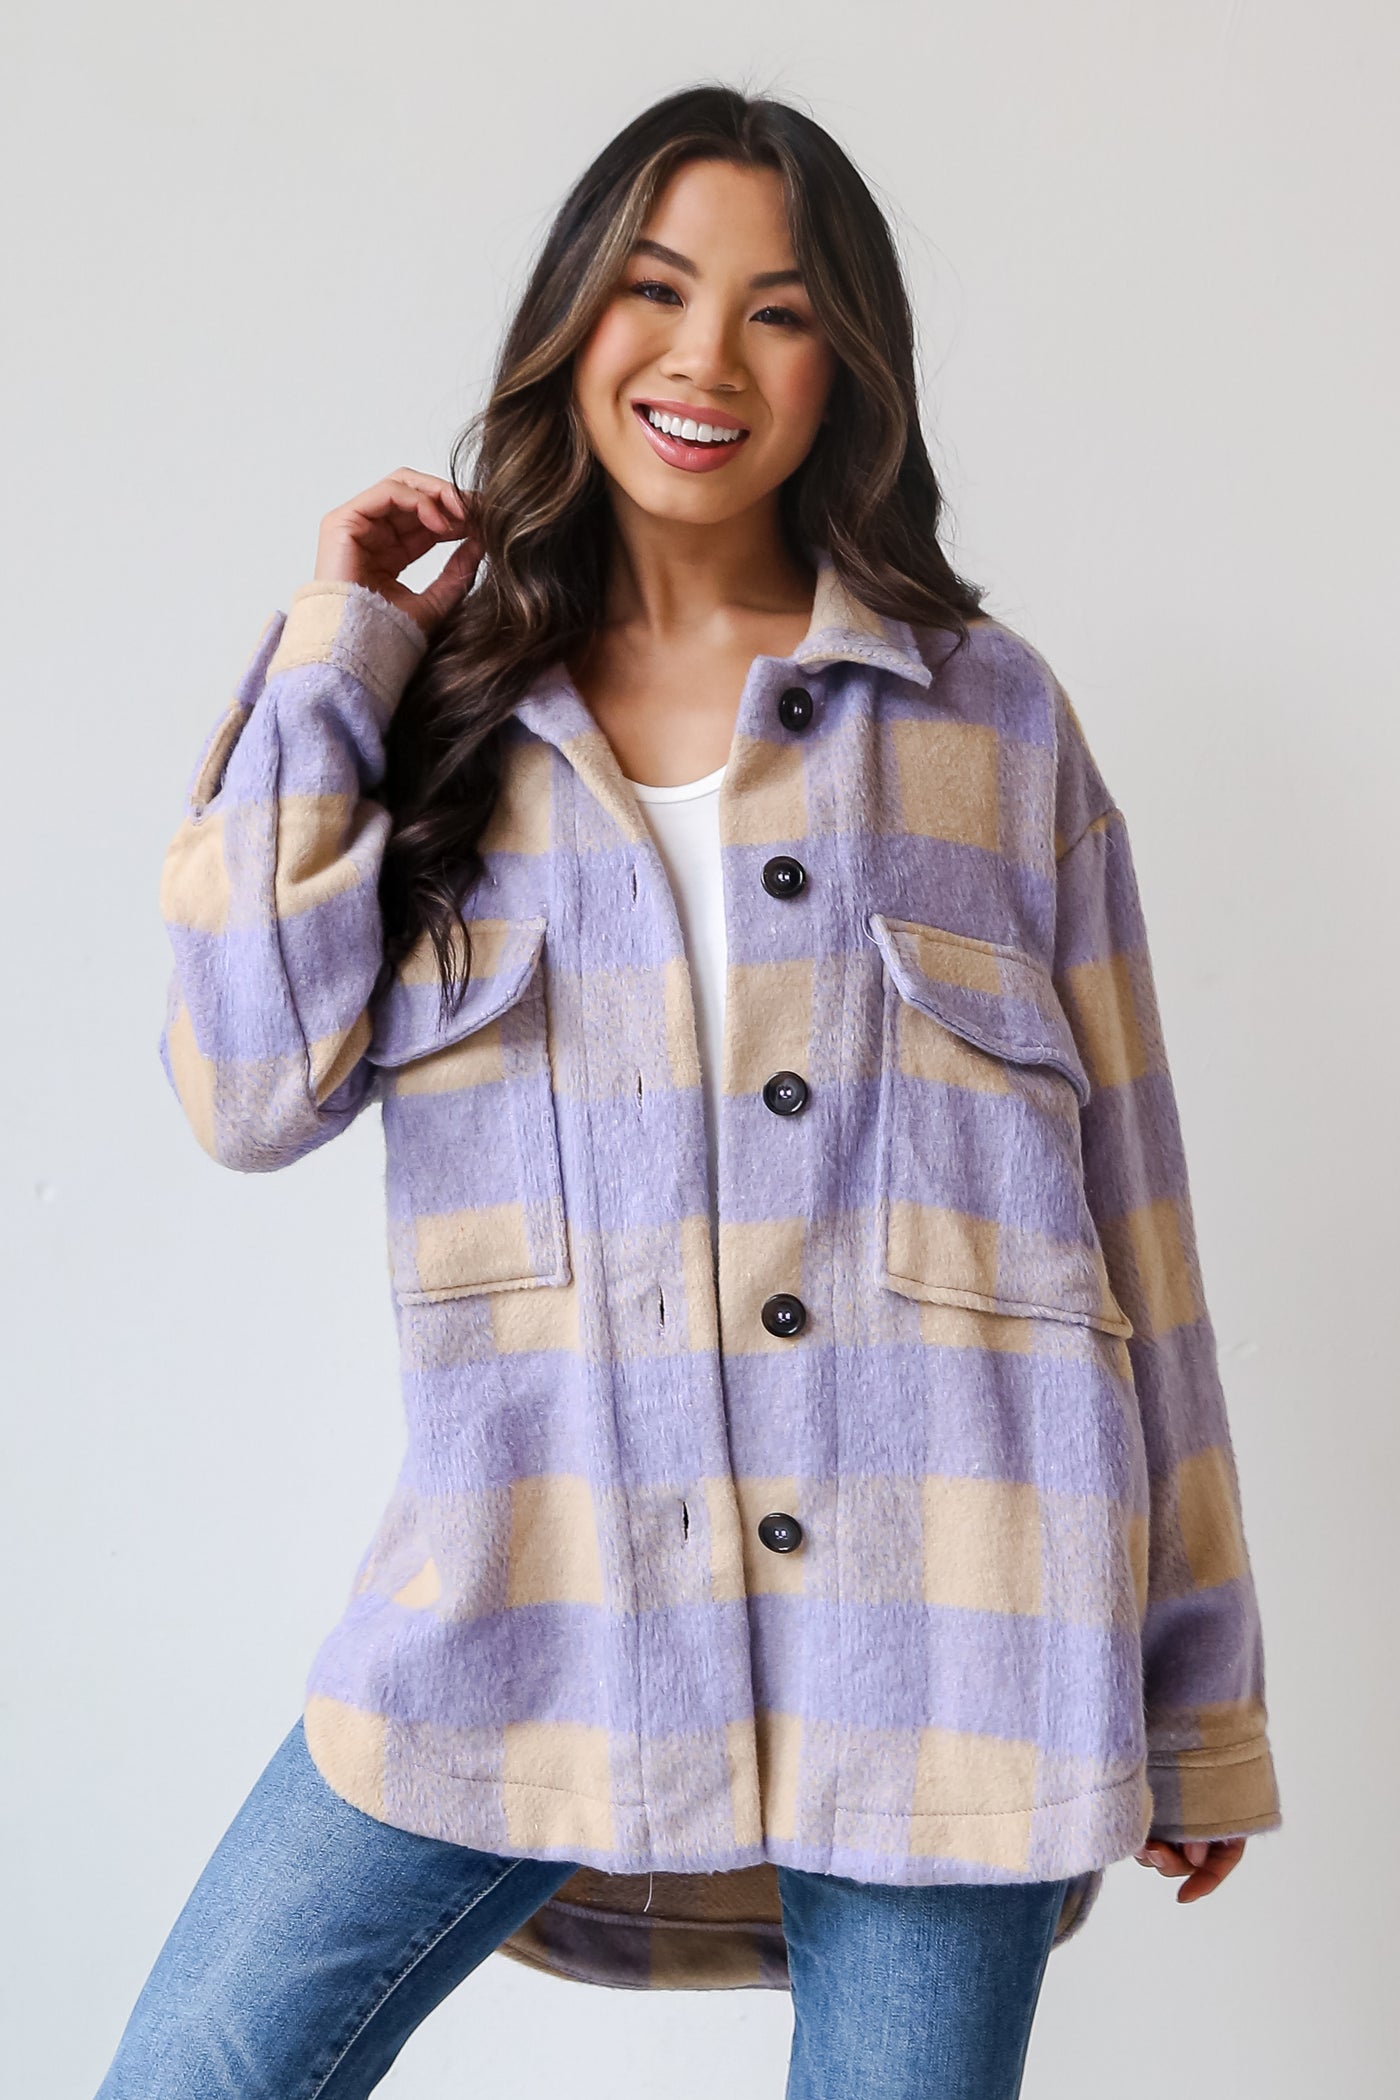 Hollister ASOS Plaid Shacket Small Lavender Cream Oversized Relaxed Street  NWT